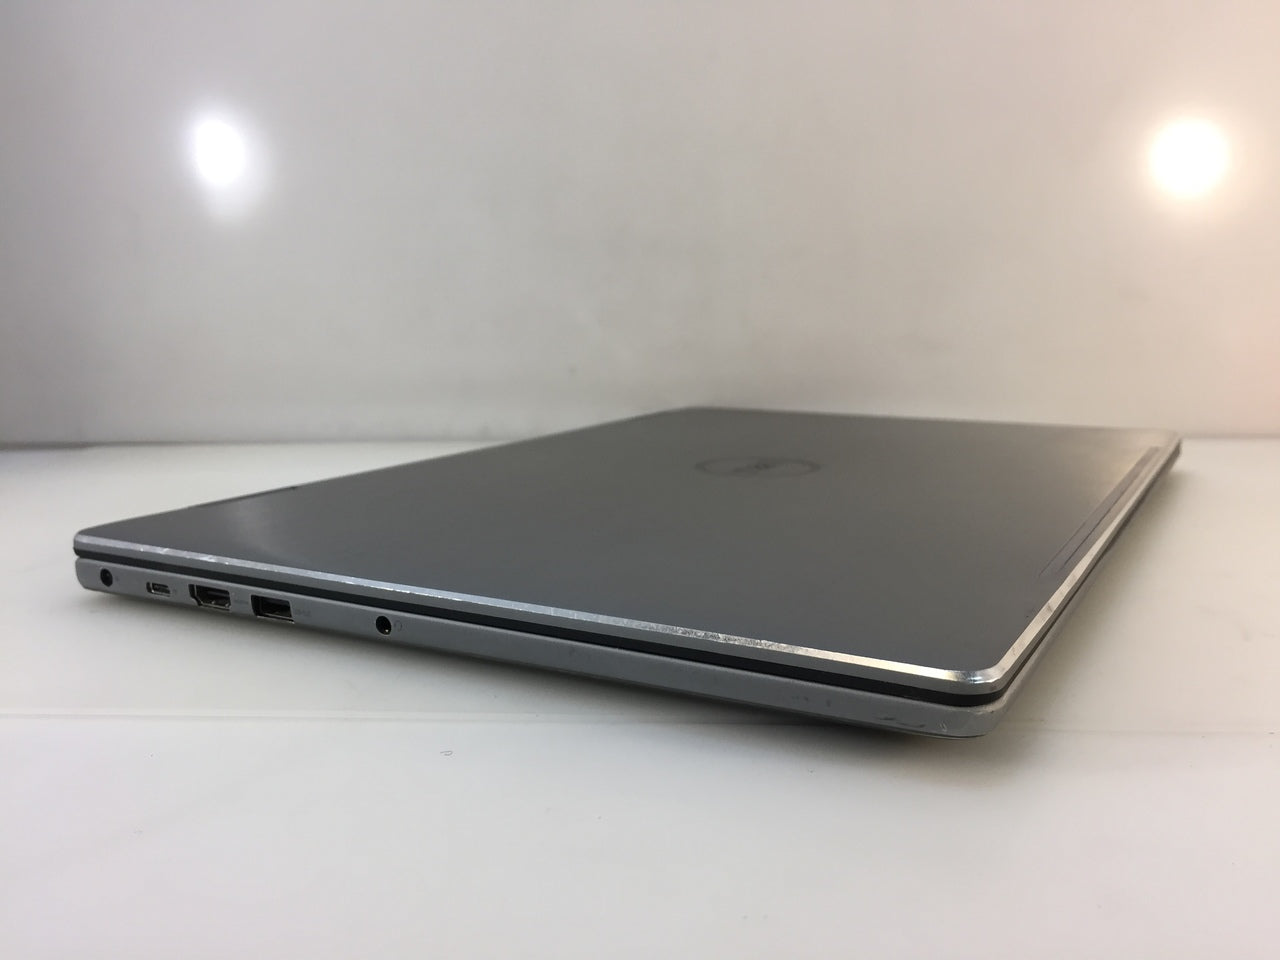 Dell Inspiron 15 7579 2-in-1 laptop 15.6 Touch, i5-7200U 2.5GHz